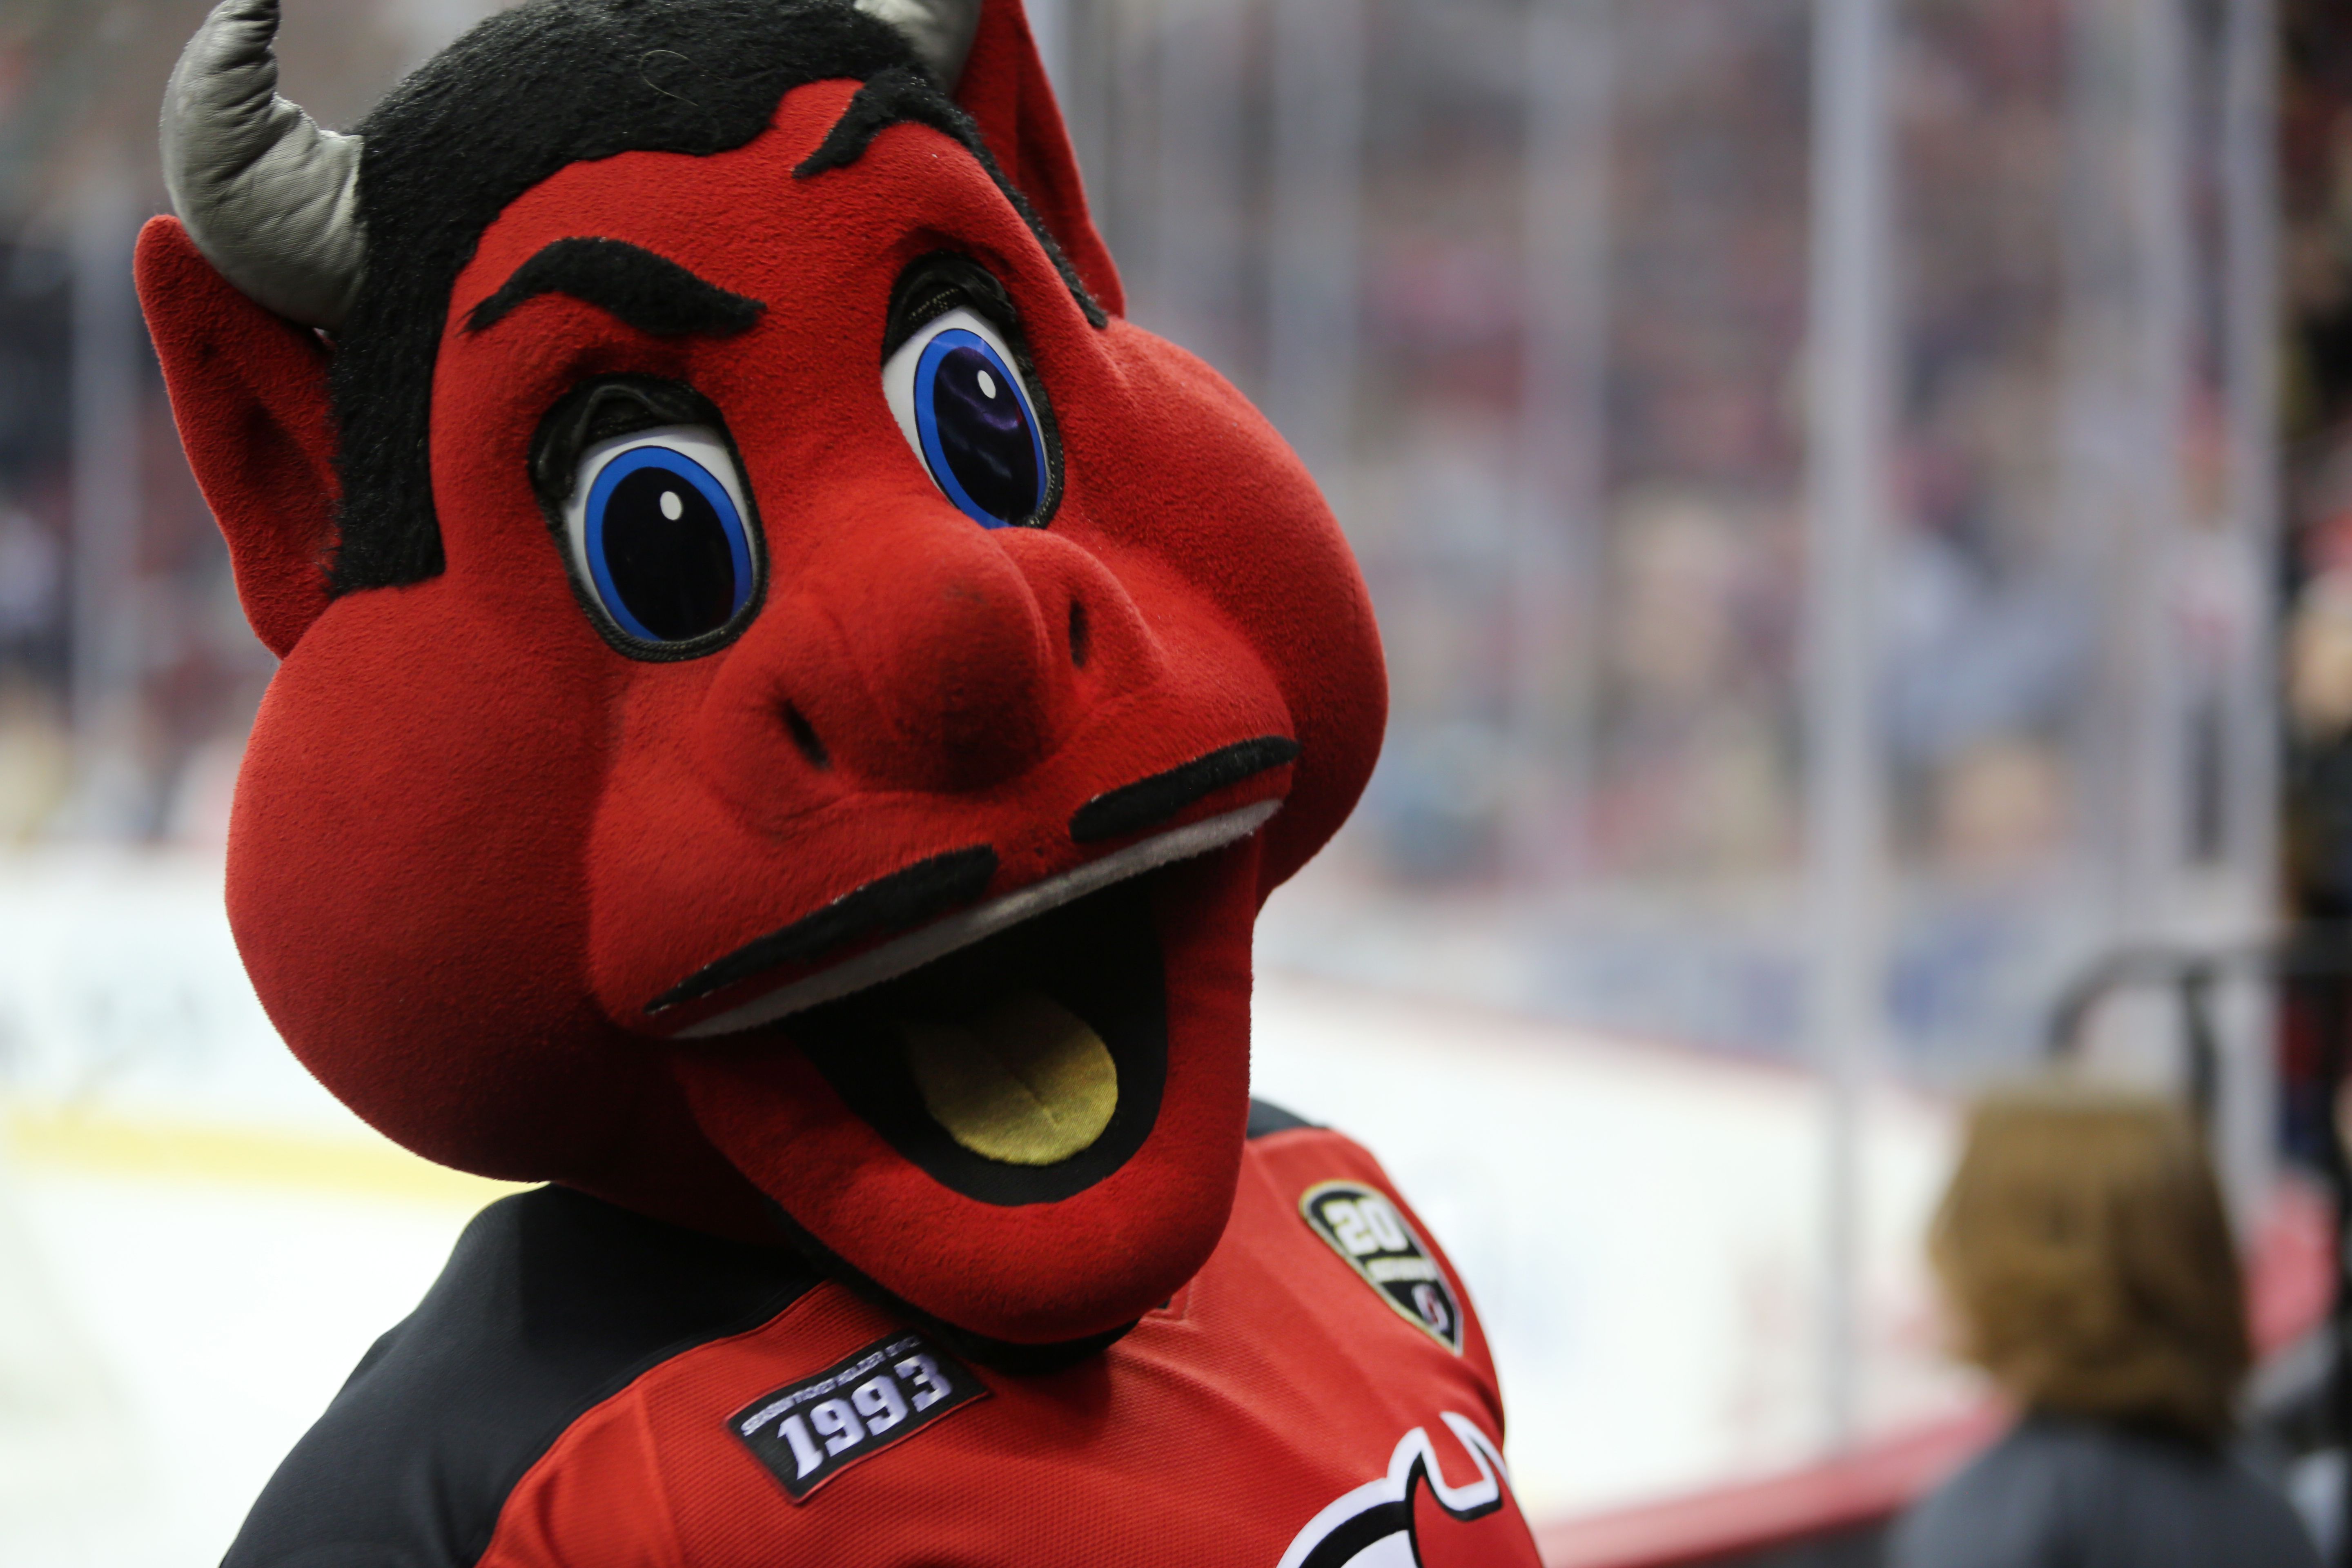 New Jersey Devil takes spill and misses wide open net, is having worst year  in mascot history, This is the Loop